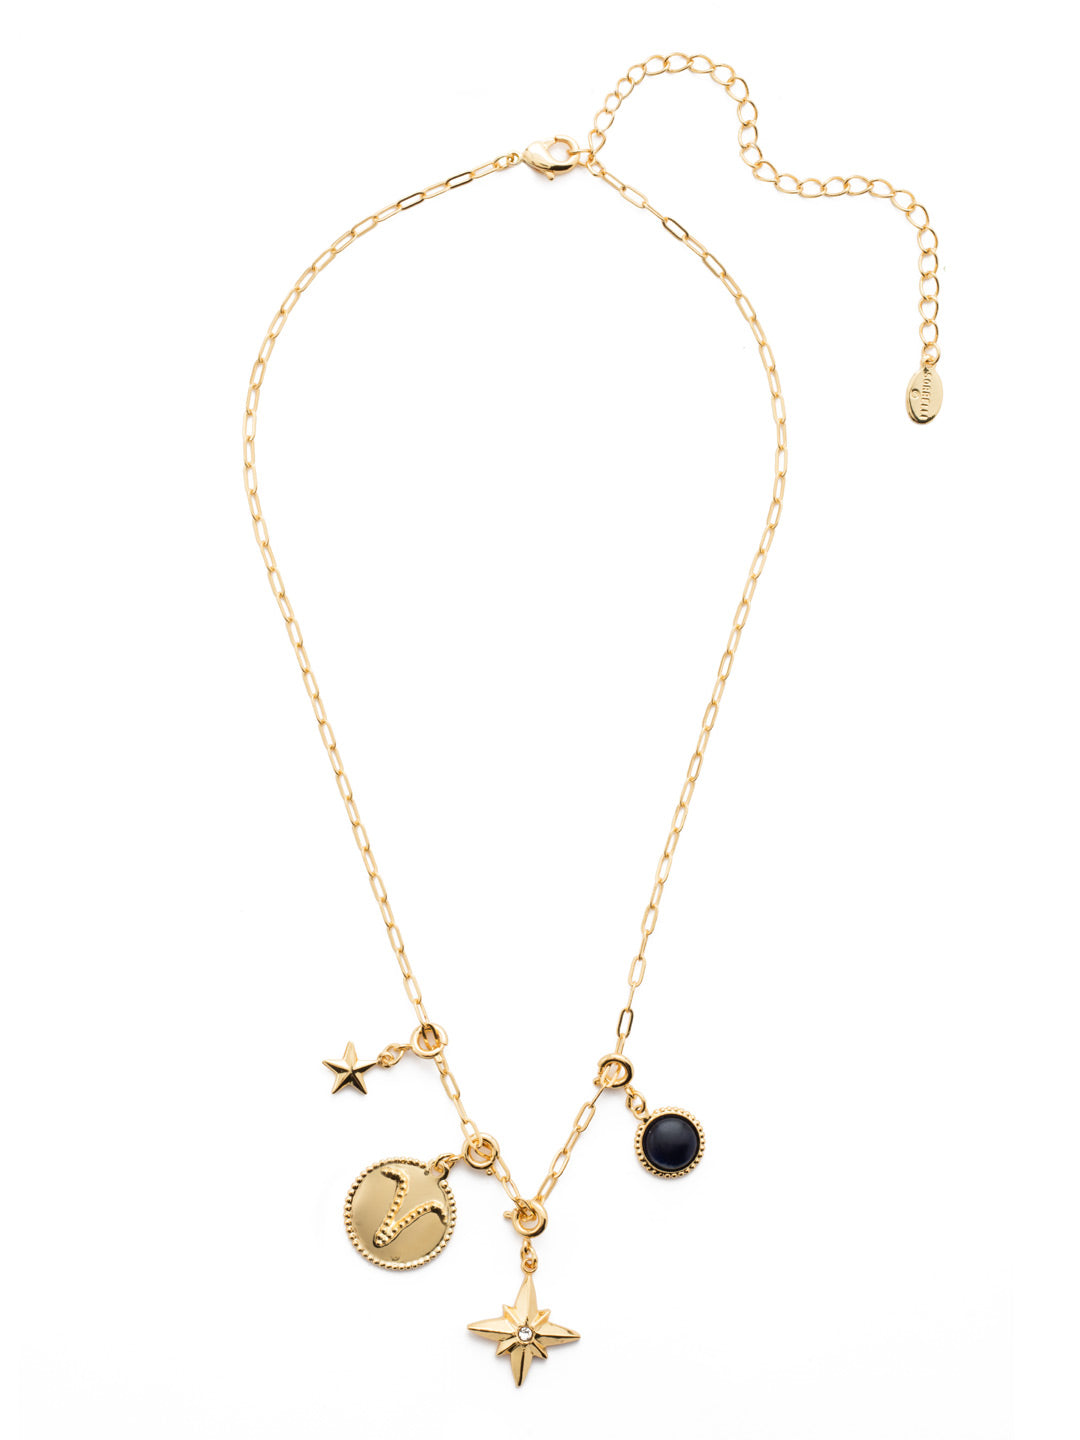 Aries Charm - 4CEU7BGMTL - <p>What's you sign? Celebrate your astrological sign Aries with one of these beautiful medallion like charms. Each charm can be easily attached to one of our favorite Sorelli chain necklaces. From Sorrelli's Bare Metallic collection in our Bright Gold-tone finish.</p>